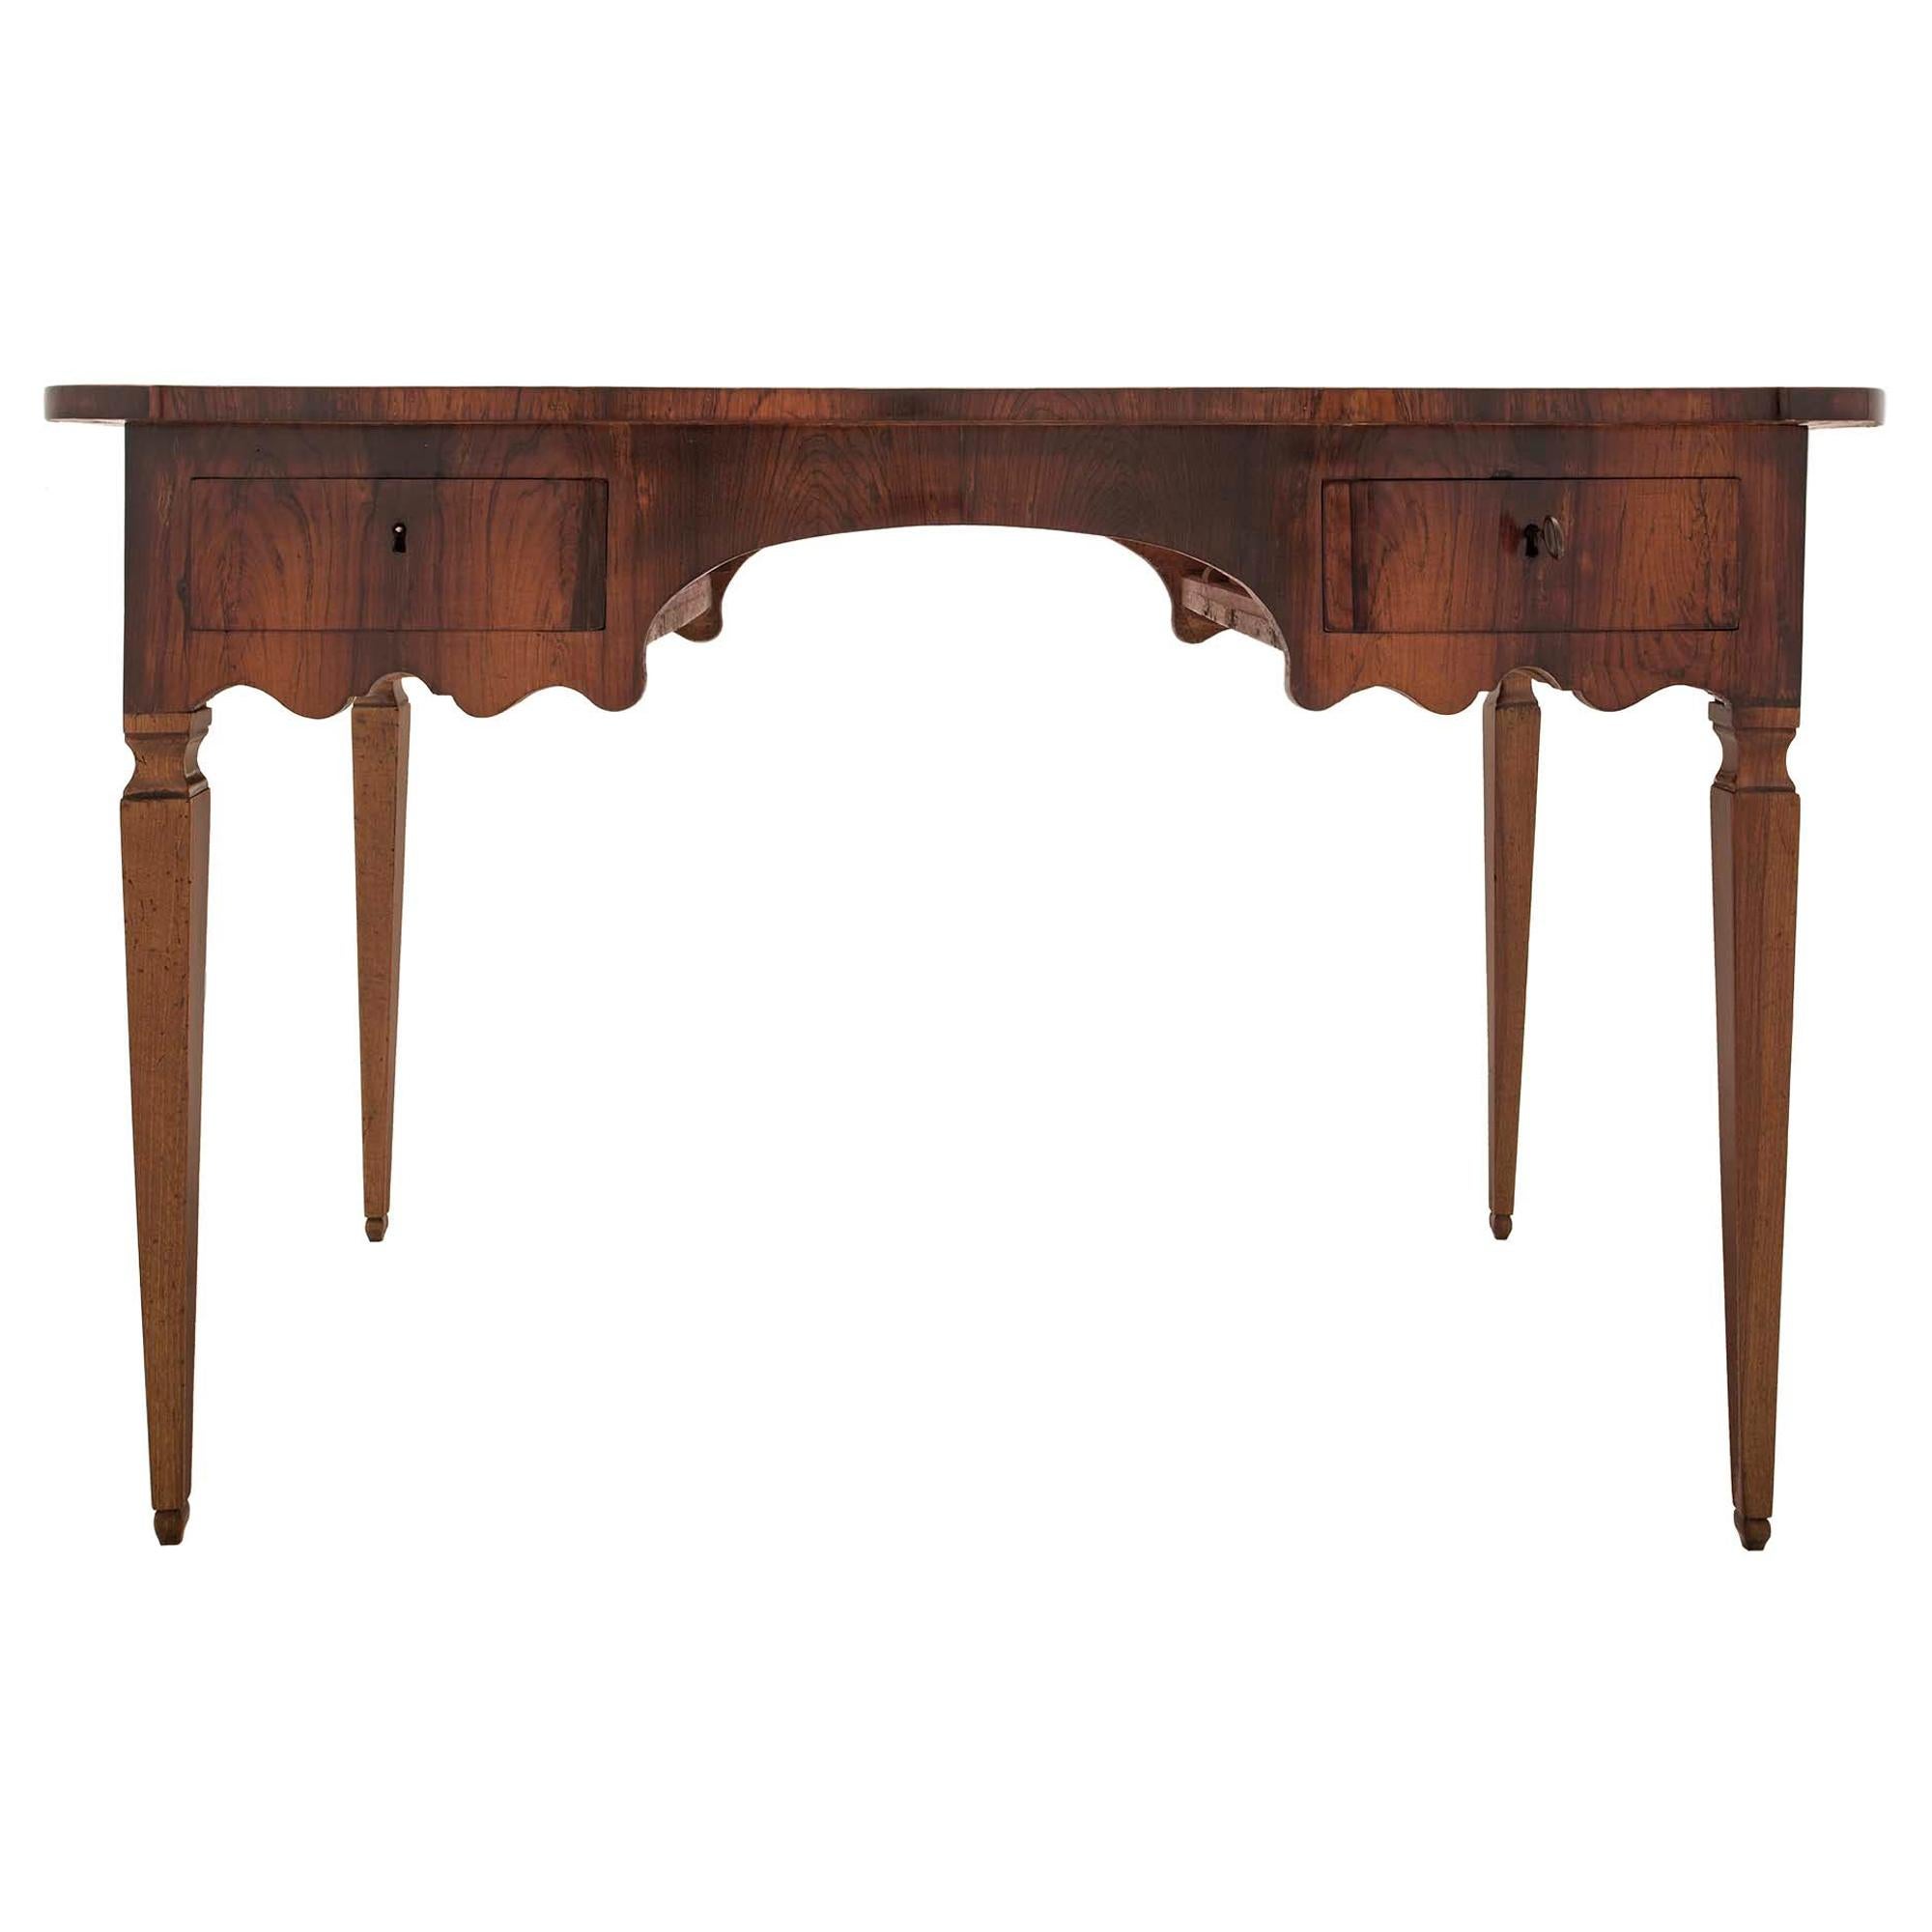 Italian 18th Century Walnut and Rosewood Tuscan Desk For Sale